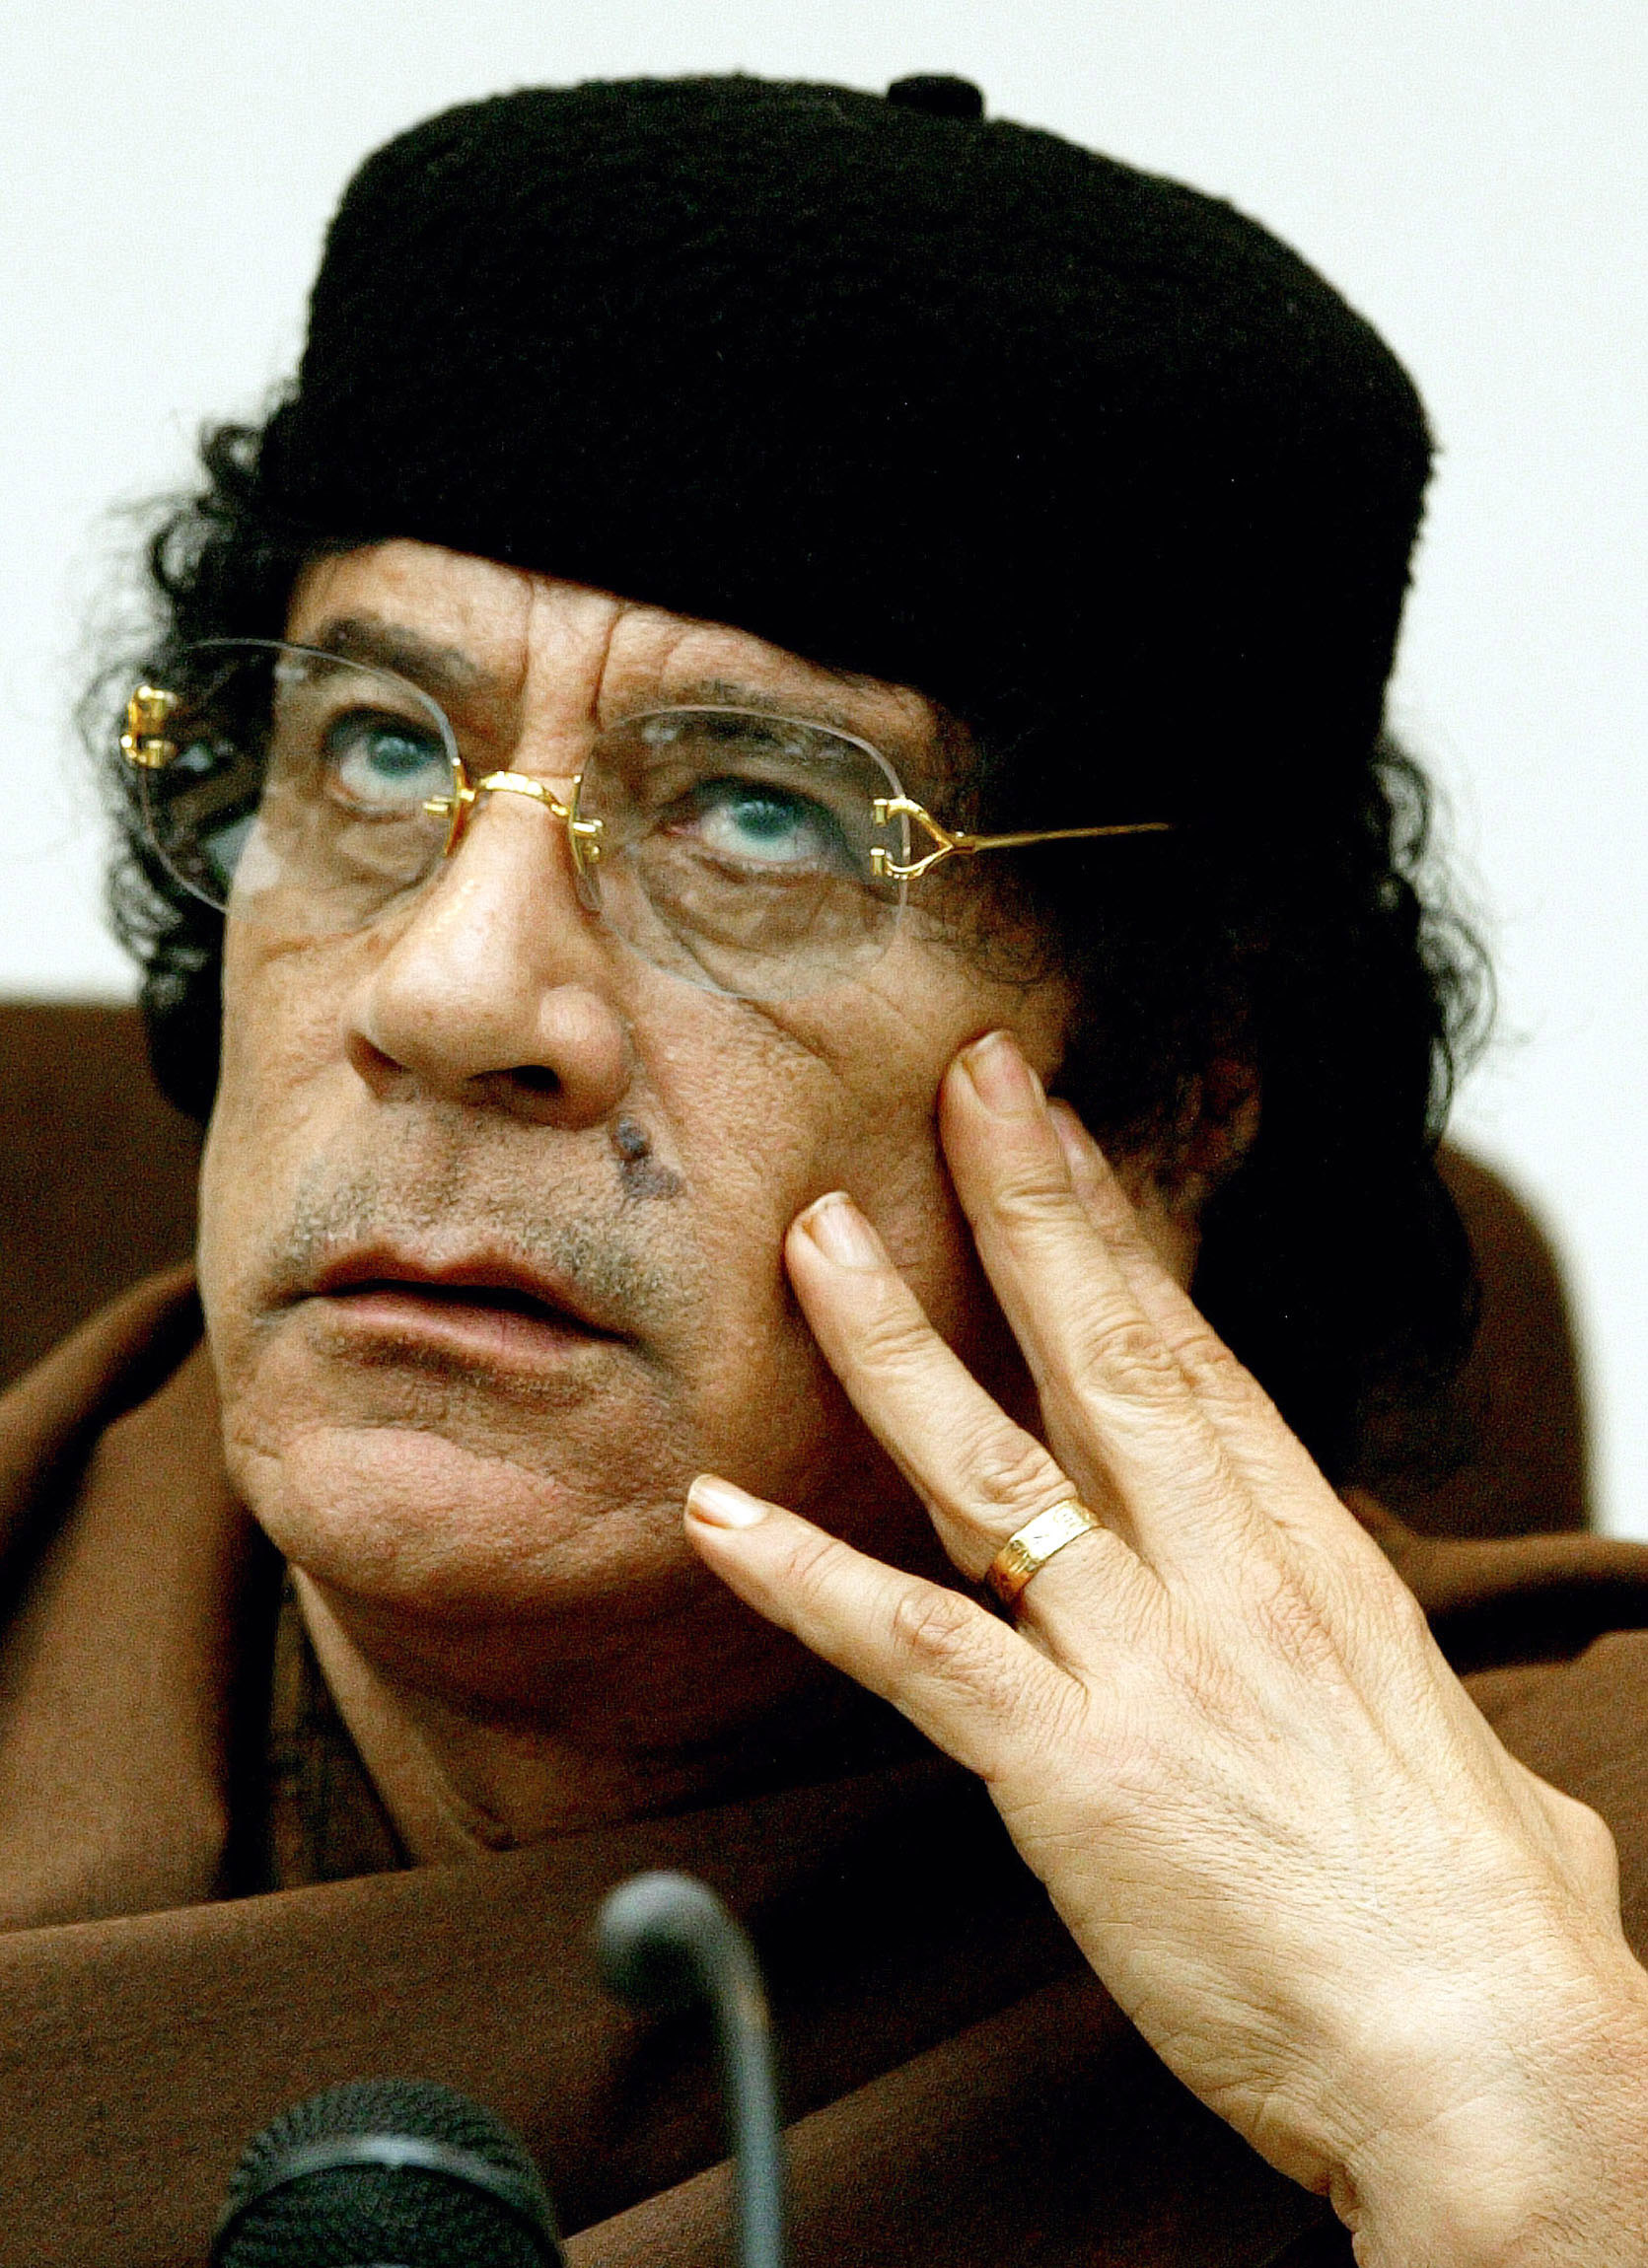 Pictures Of Gaddafi